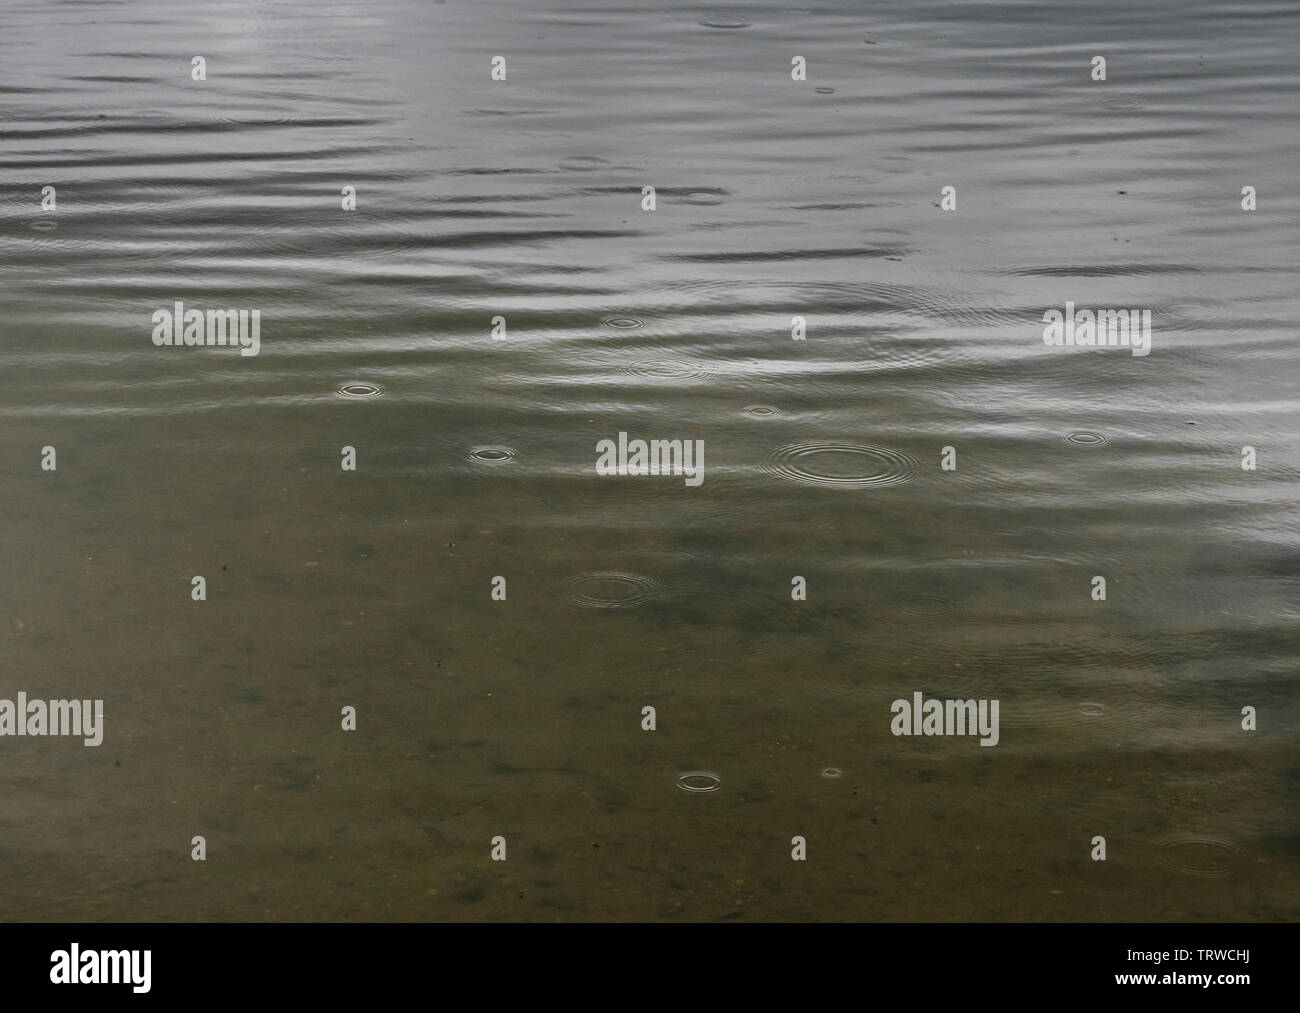 Ferry Meadows Country Park, Peterborough, Cambridgeshire, UK, June 12th, 2019, UK weather. After two days of relentless rain, today started out dry but the rain returned in the afternoon. Here we see circular ripples on the lake surface as the rain starts to fall. Credit: Michael David Murphy / Alamy Live News Stock Photo